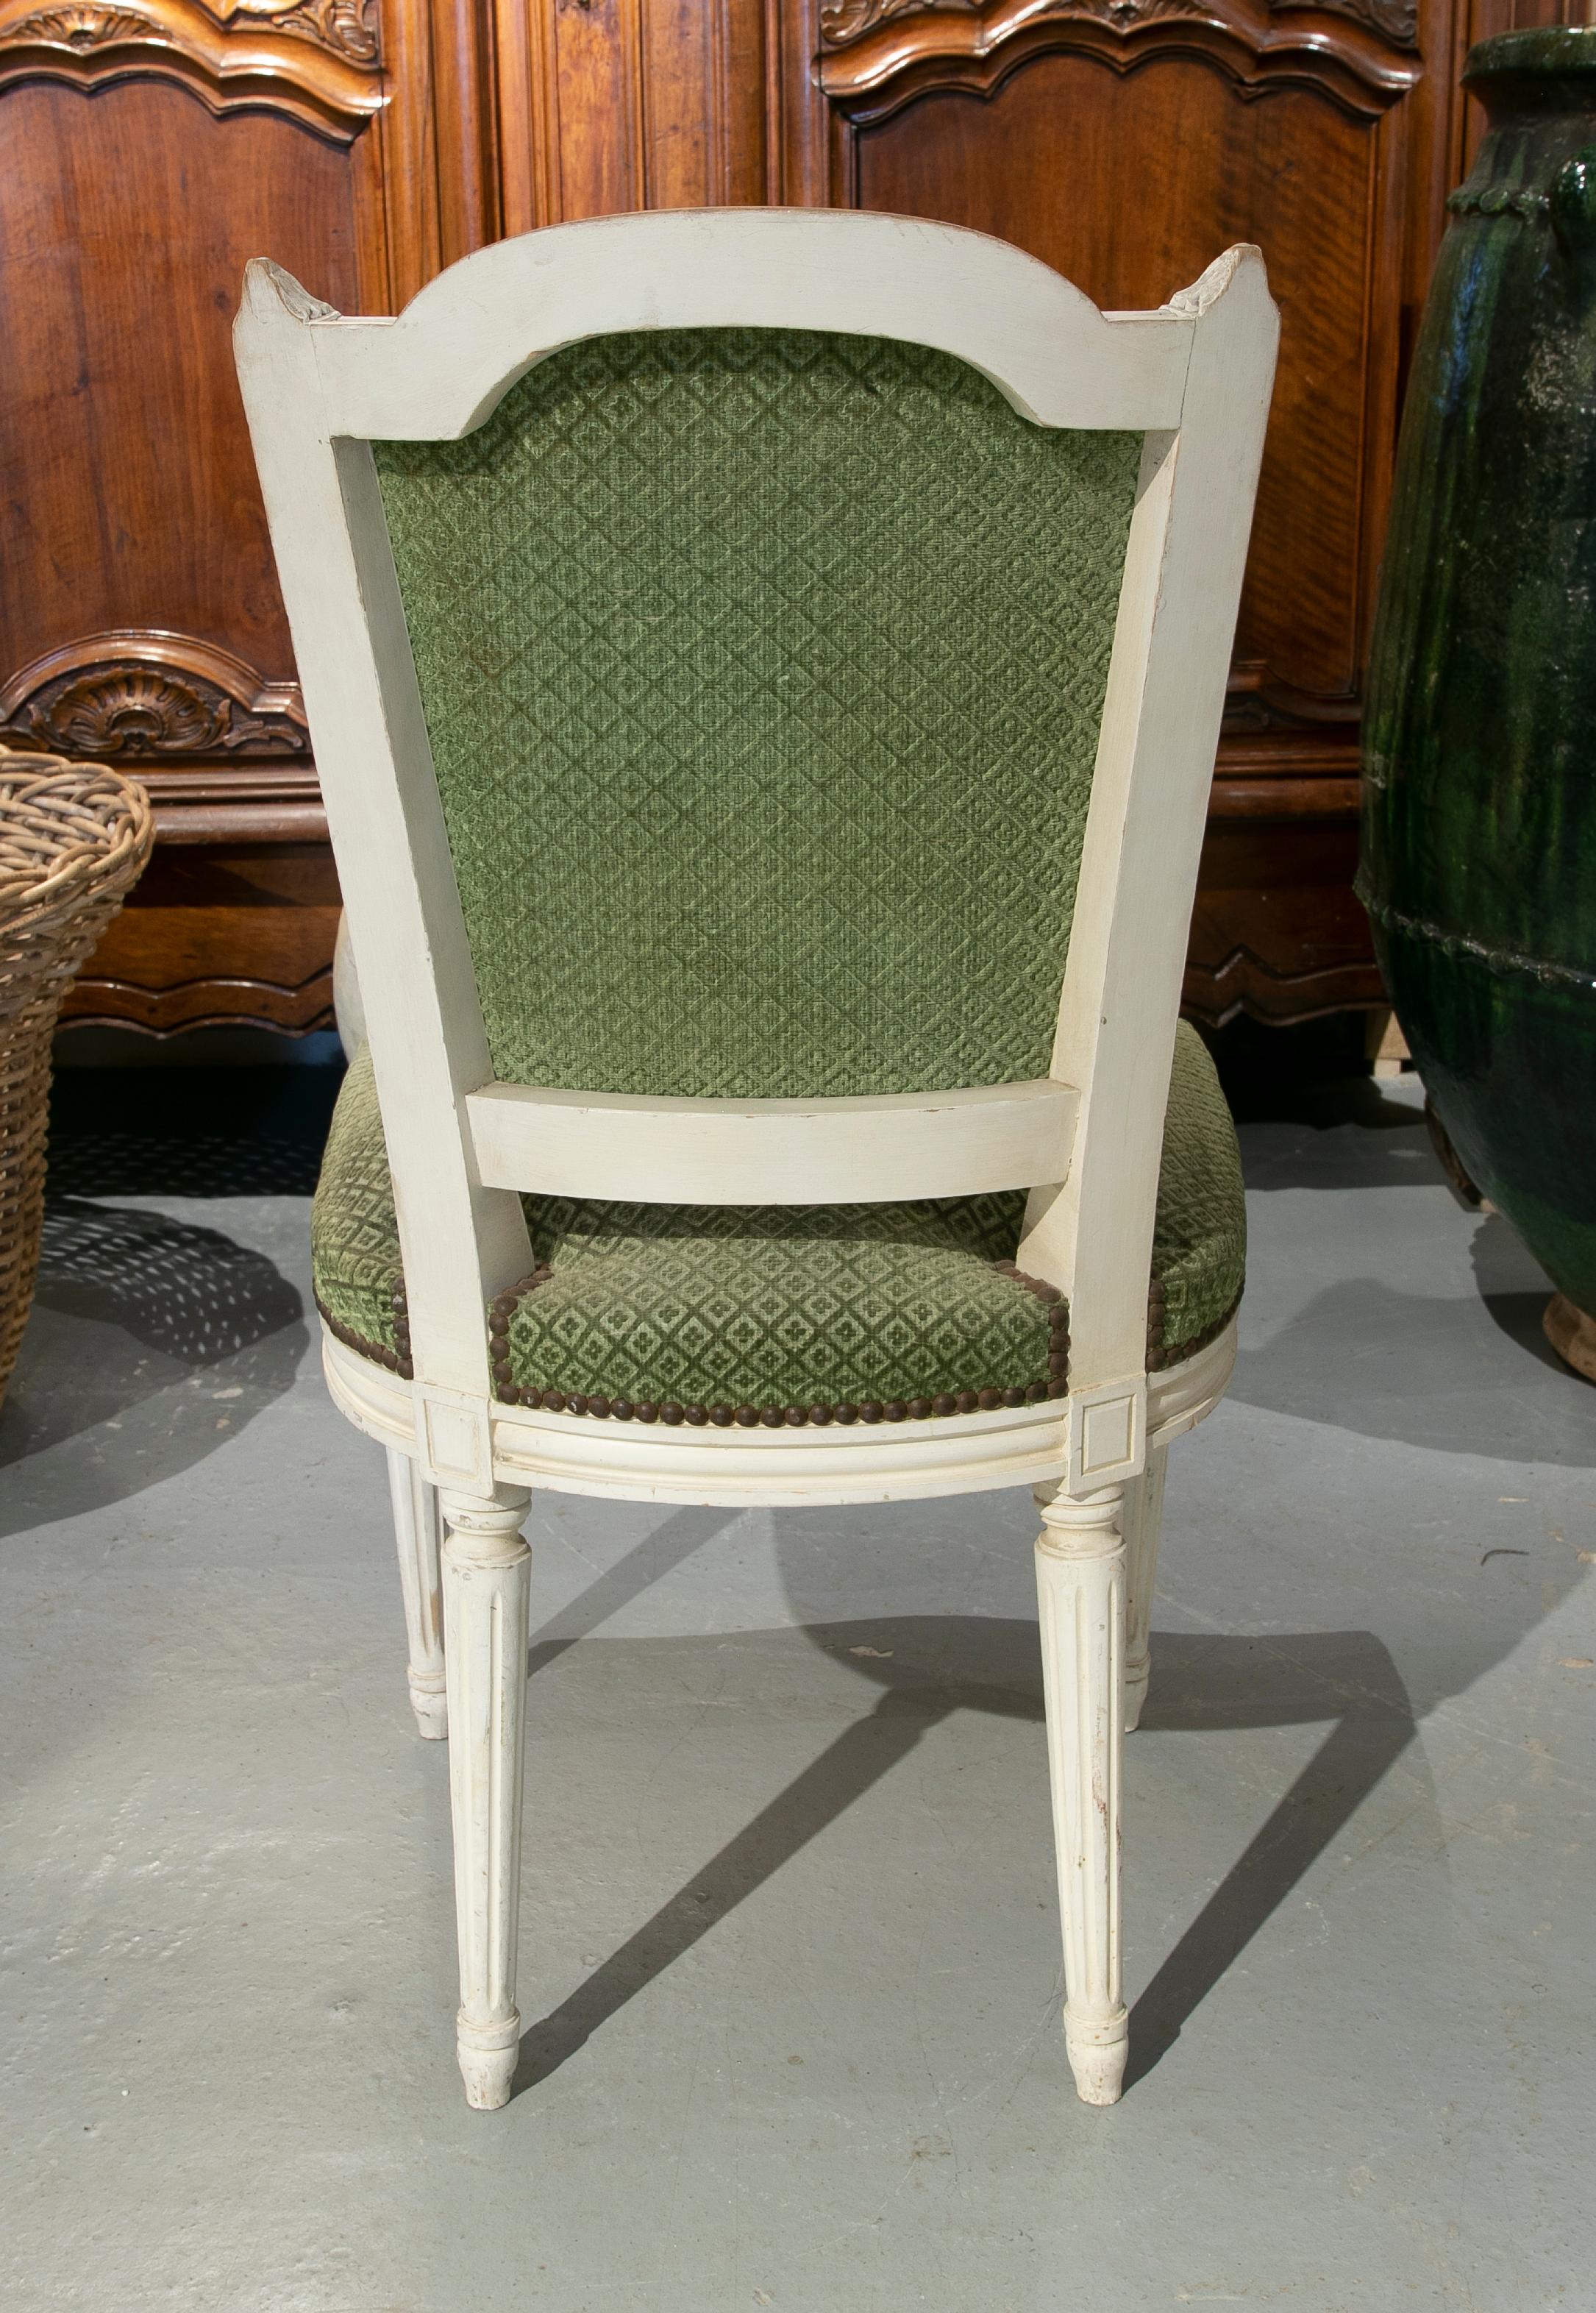 19th Century, French, Set of Six Wooden Chairs Upholstered in Green For Sale 2